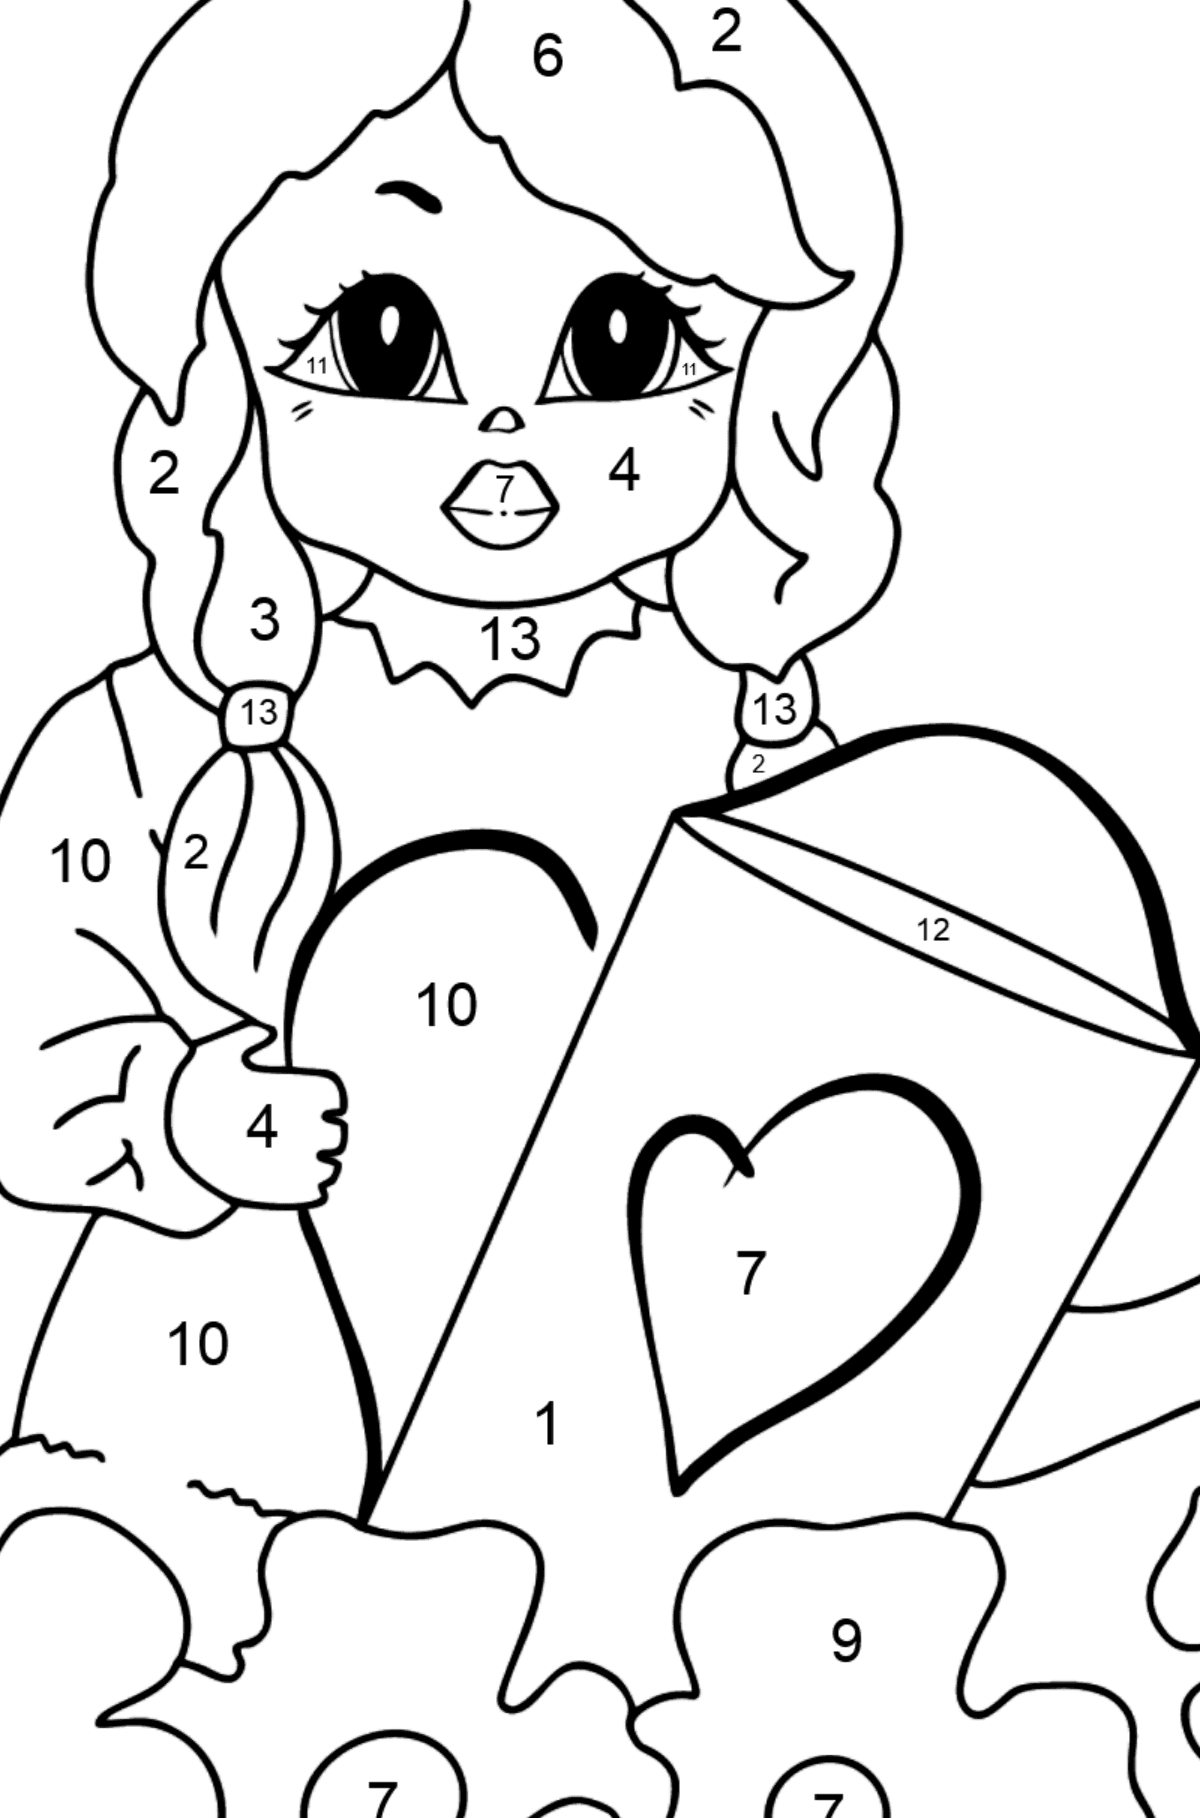 Coloring Page - A Princess with a Watering Can - Coloring by Numbers for Kids